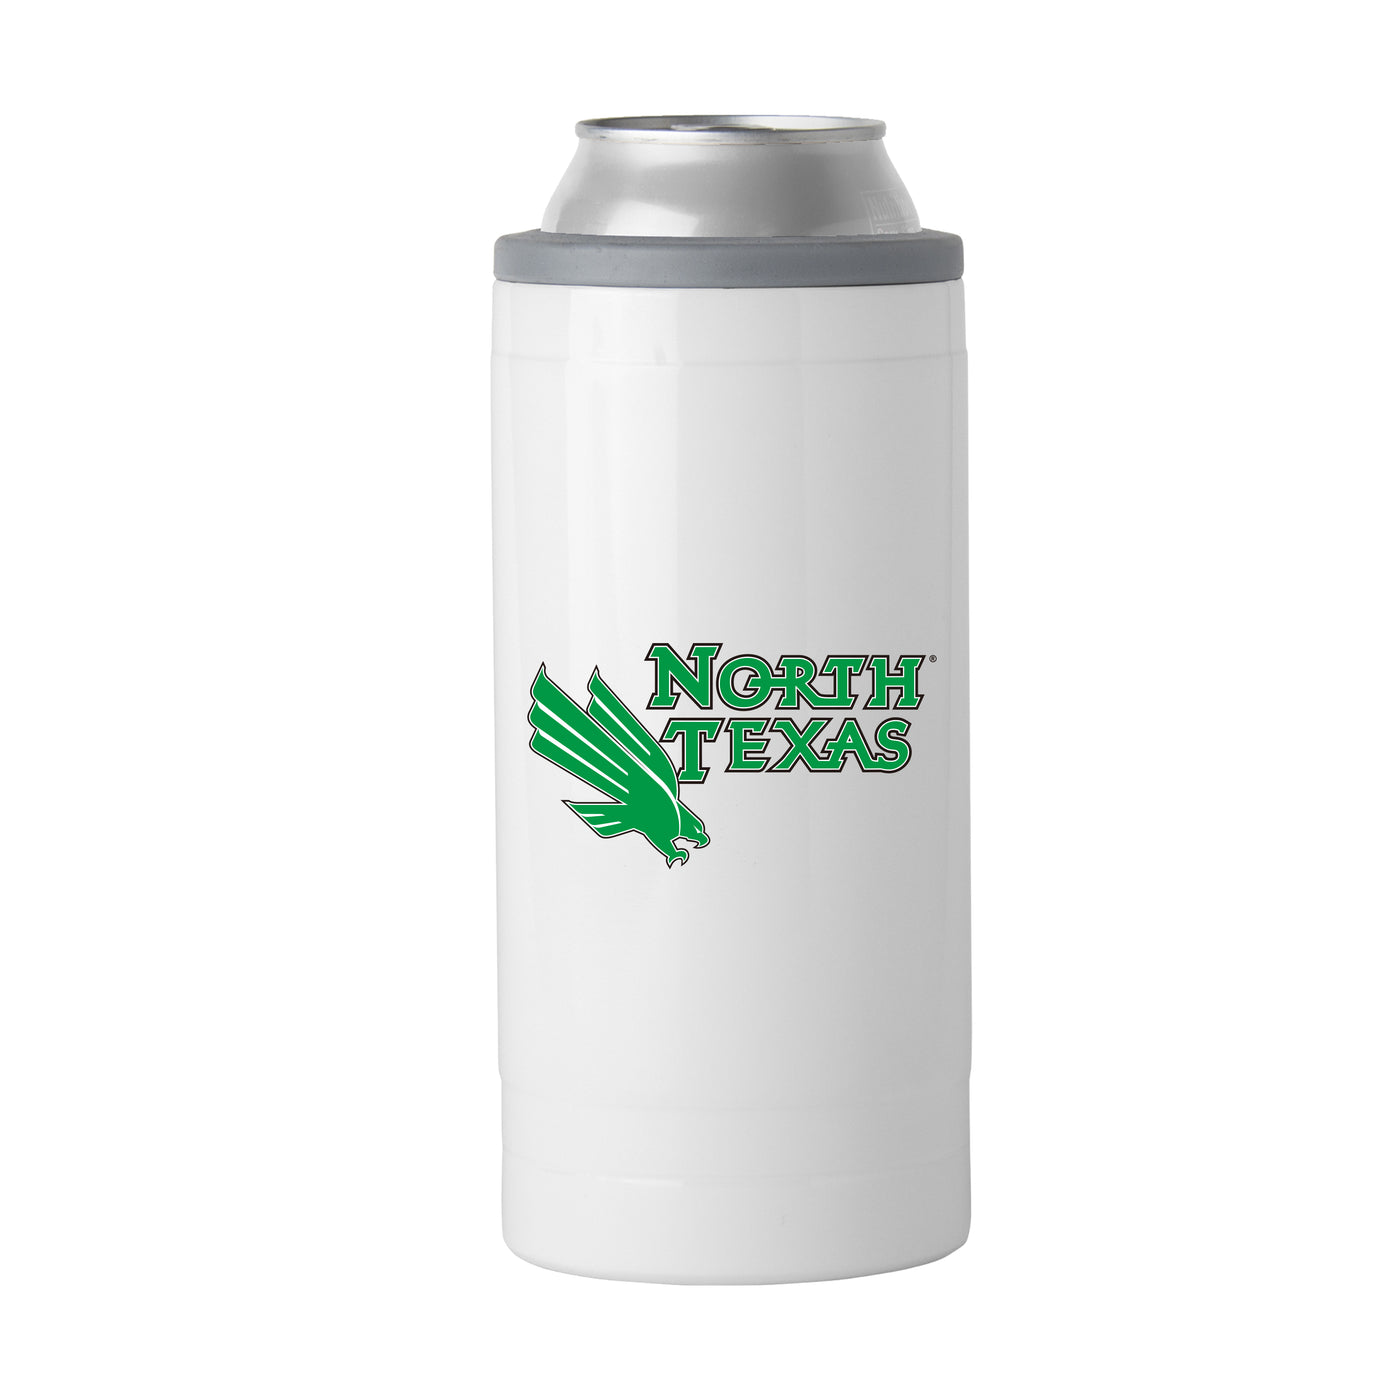 North Texas   Gameday 12 oz Slim Can Coolie